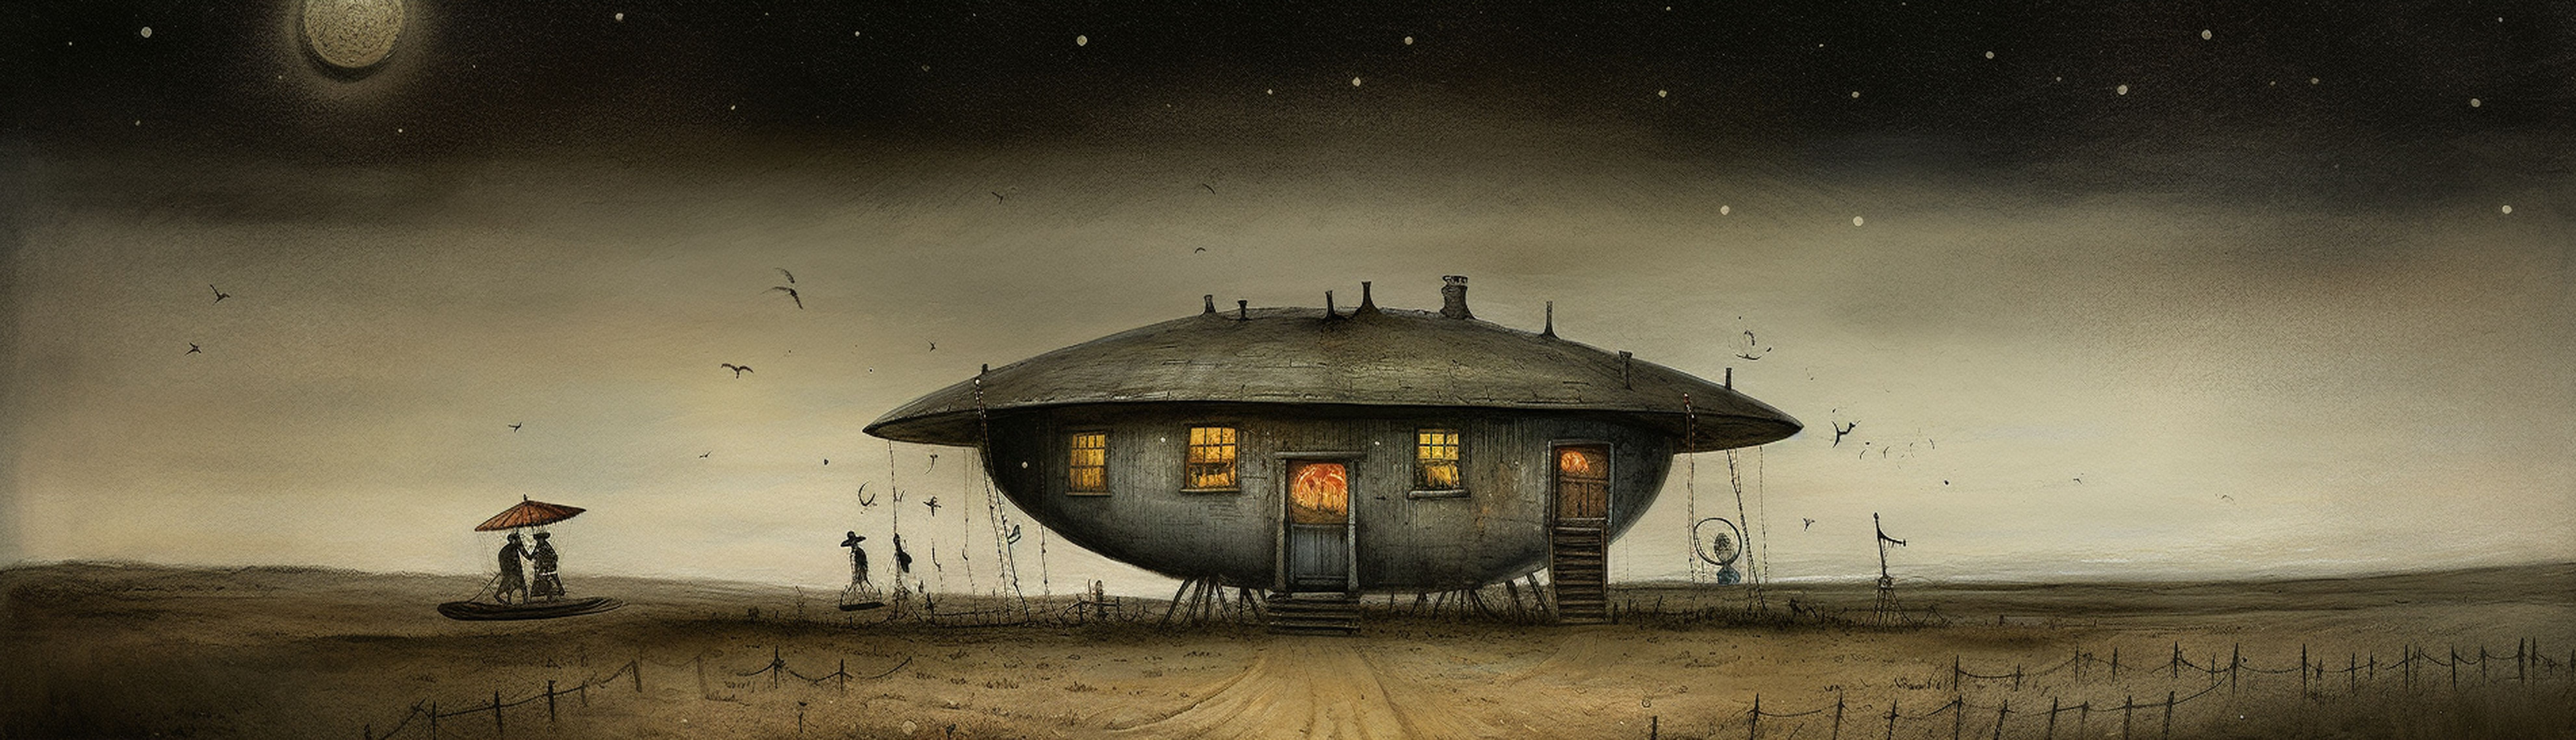 Ramades - House, car and flying saucer 6